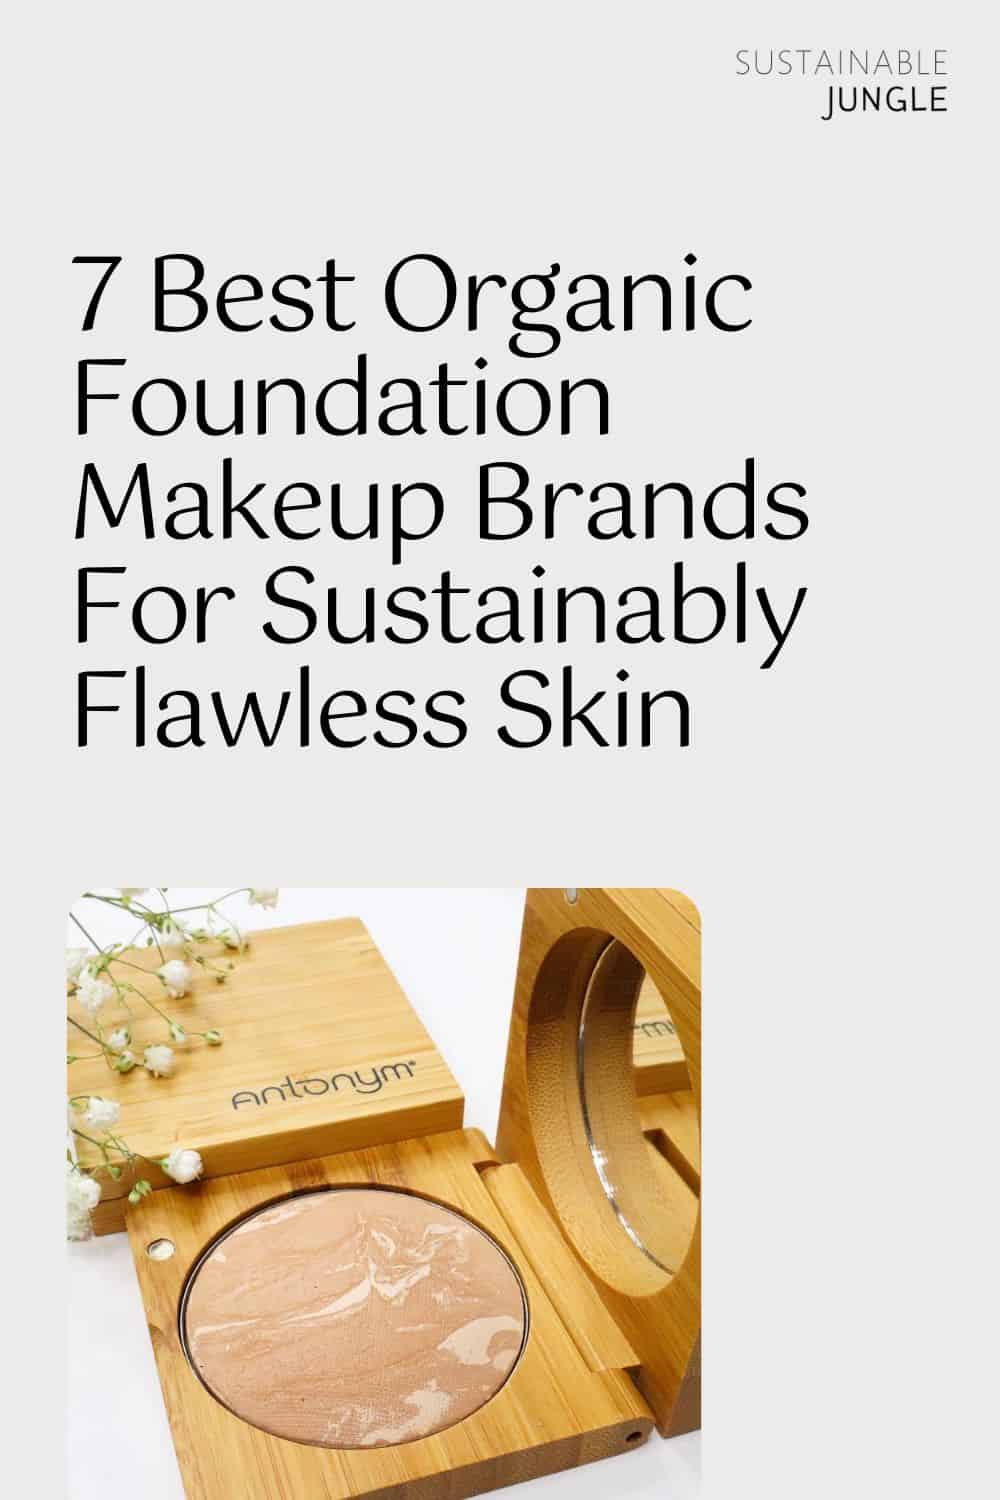 7 Best Organic Foundation Makeup Brands For Sustainably Flawless Skin Image by Antonym Cosmetics #organicfoundation #organicmakeupfoundation #bestorganicfoundations #sustainablefoundations #sustainablefoundationmakup #naturalorganicfoundation #sustainablejungle